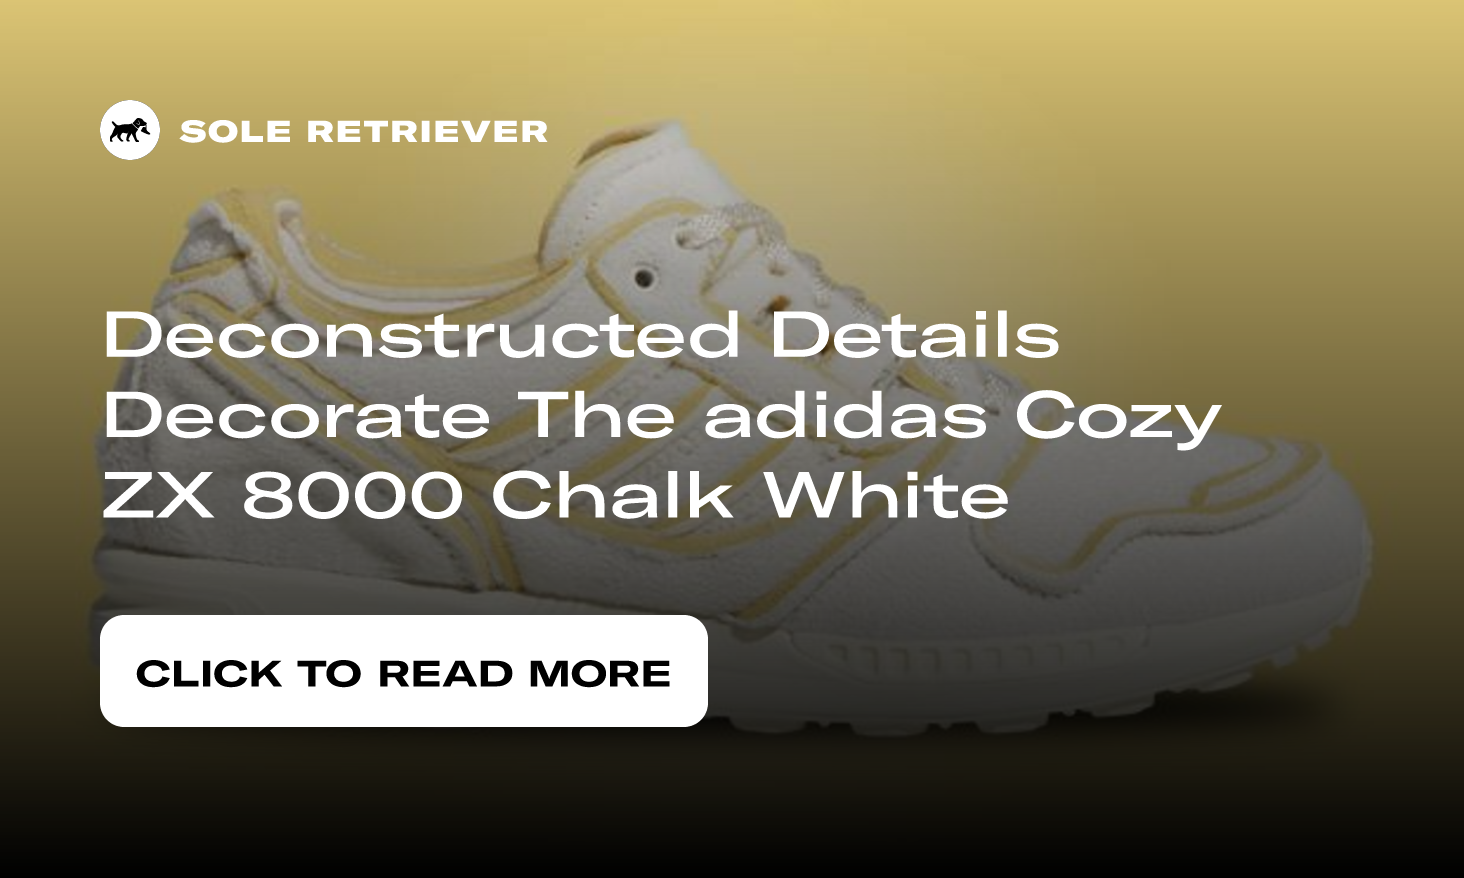 Deconstructed Details Decorate The adidas Cozy ZX 8000 Chalk